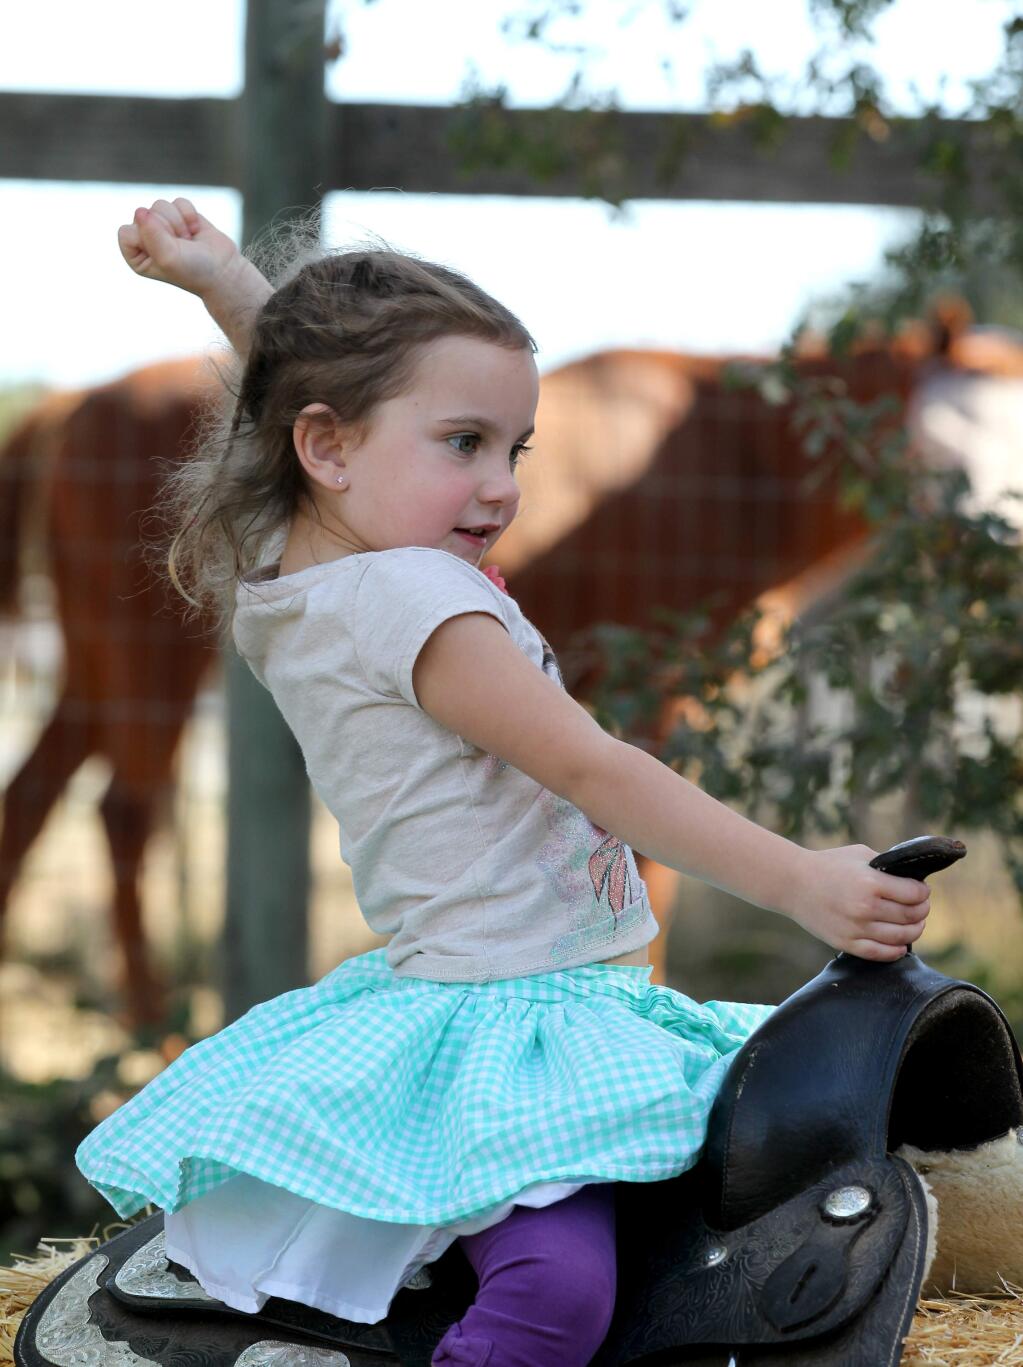 Remi Rightsell, 4, of Santa Rosa, plays on a saddle at The Pony Express Equine Assisted Skills for Youth's 2018 12th Annual Horse Show/Fundraiser in Santa Rosa, on Sunday, November 4, 2018. (Photo by Darryl Bush / For The Press Democrat)